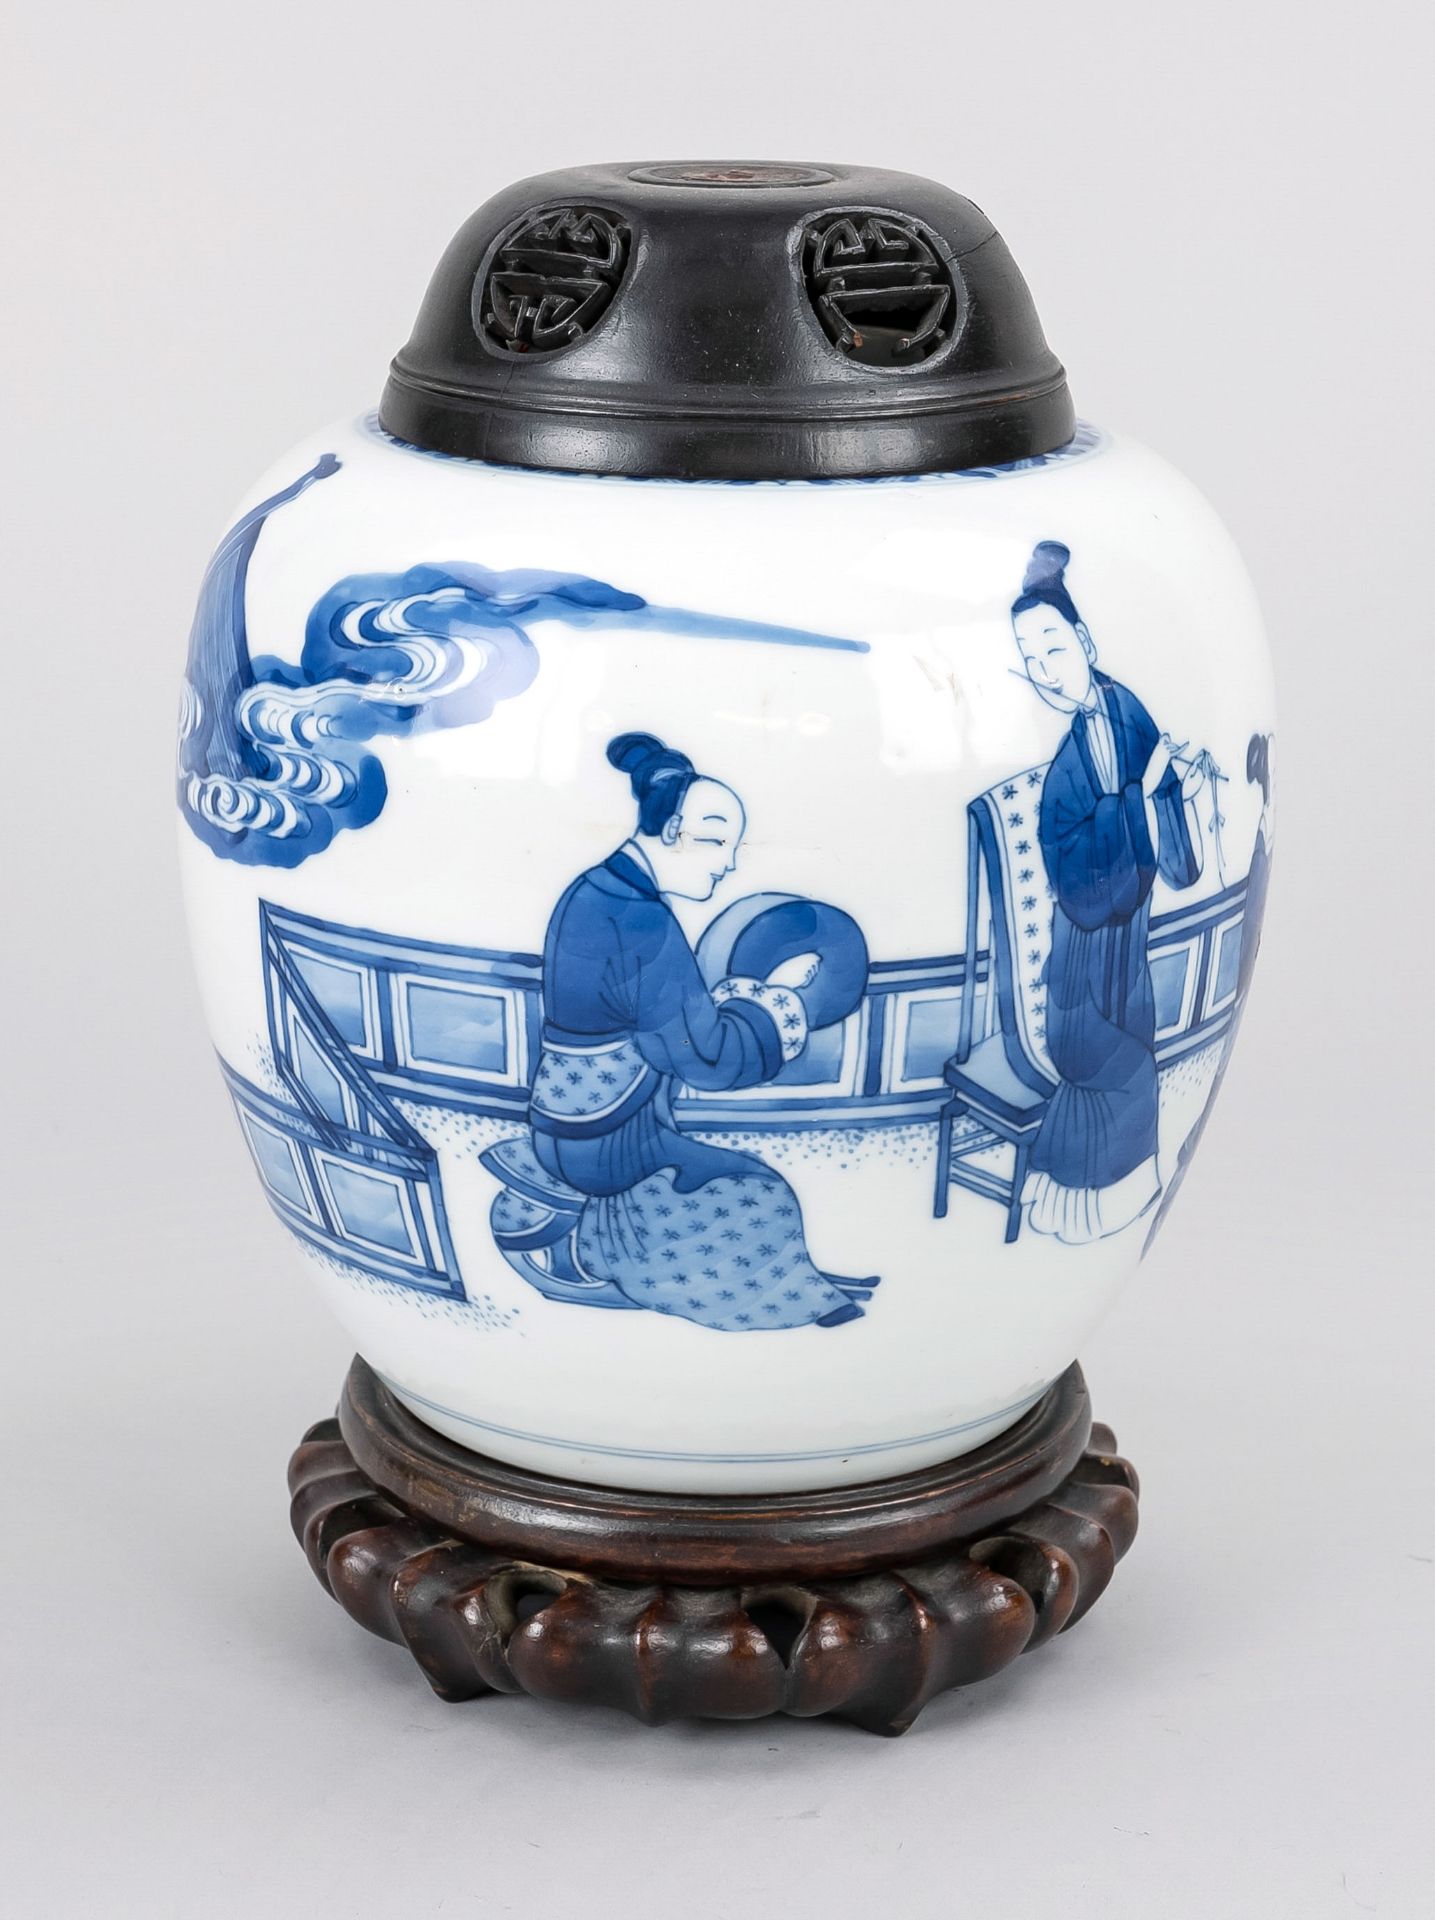 Kangxi anglaise pot, China, Qing dynasty(1644-1911), 18th century or later, porcelain with cobalt